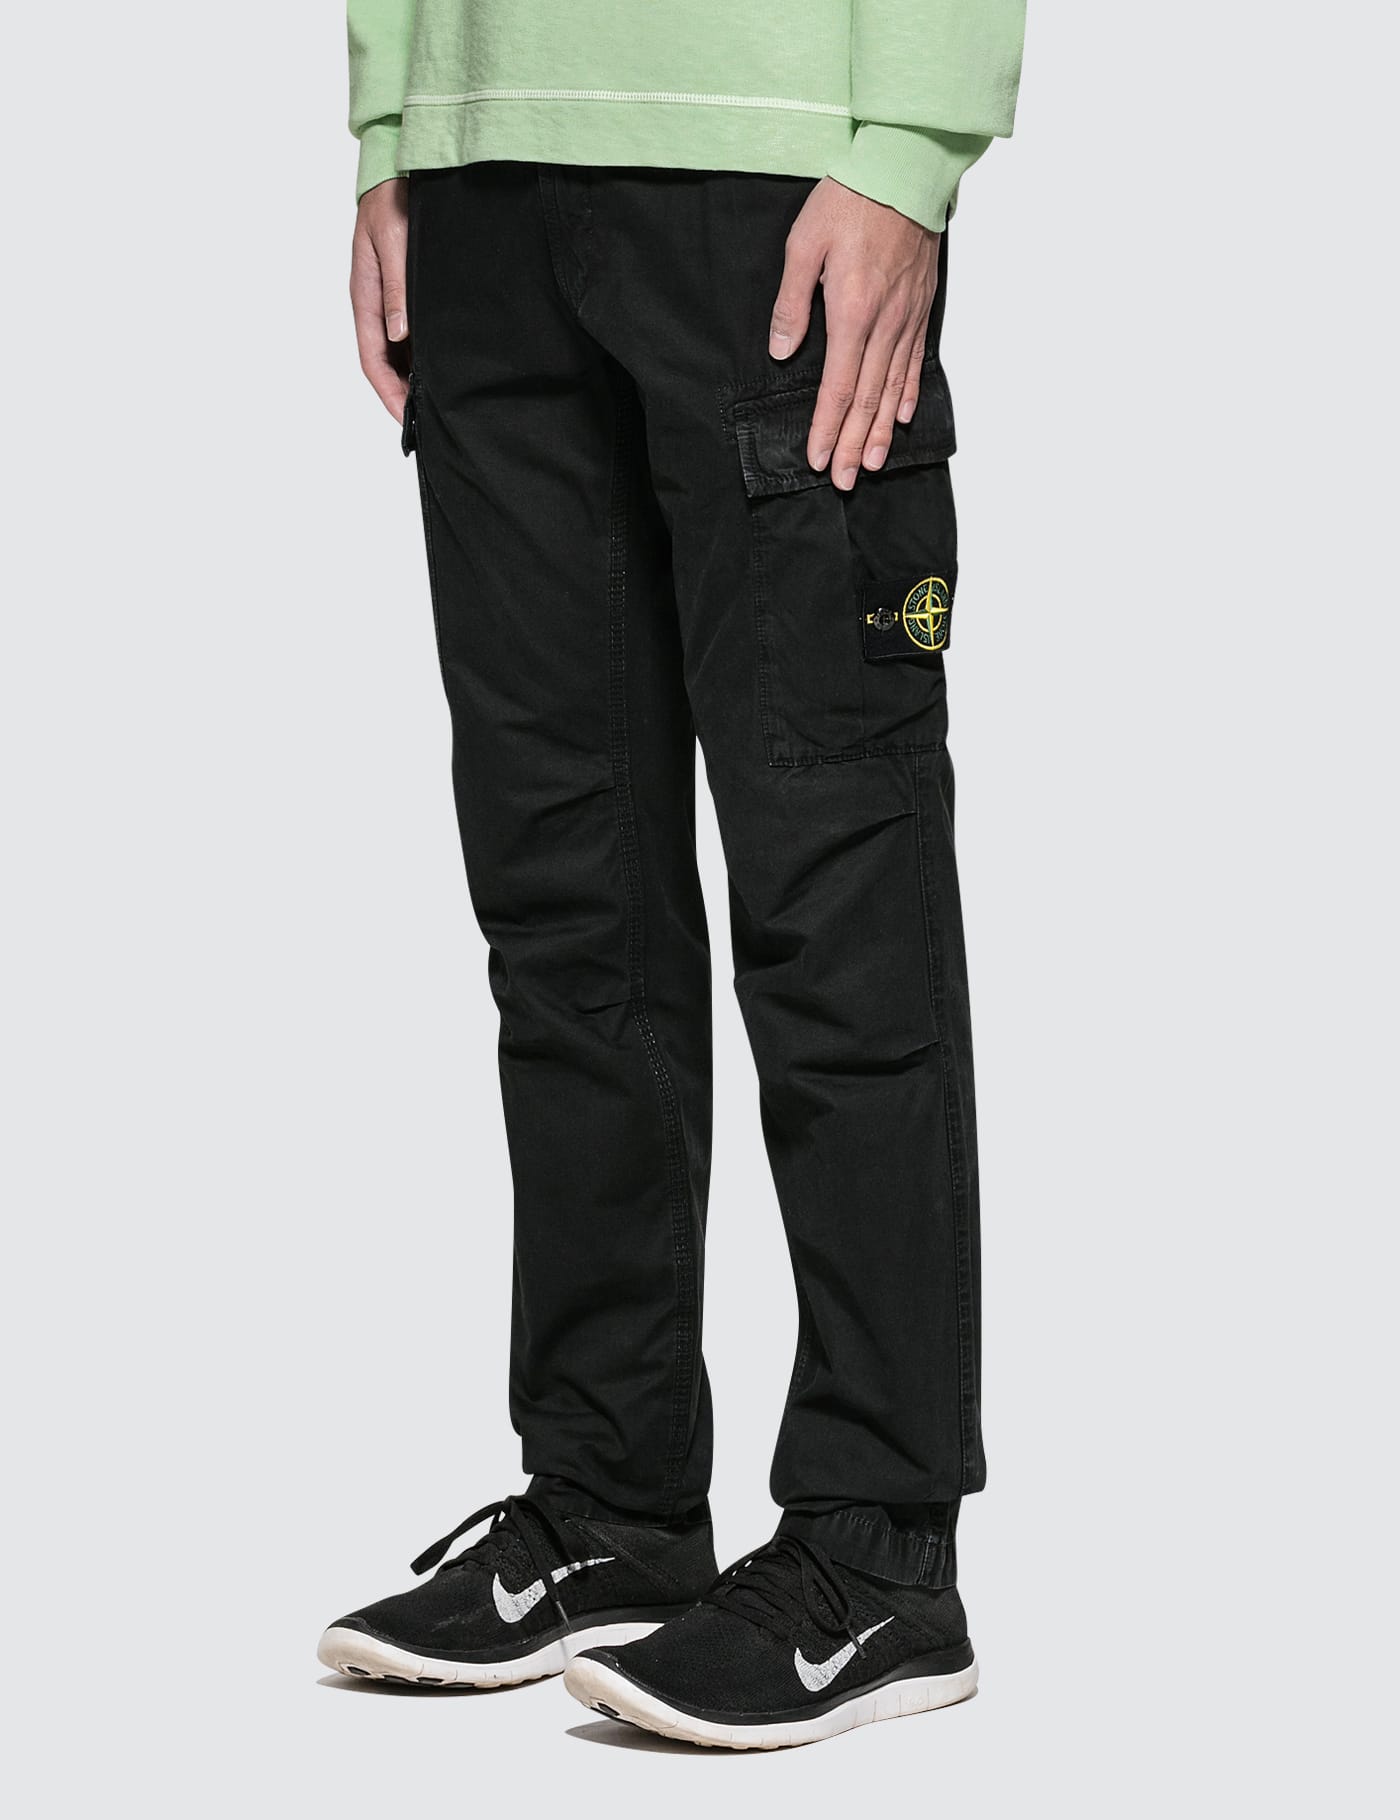 Stone Island - Cargo Pants | HBX - Globally Curated Fashion and 